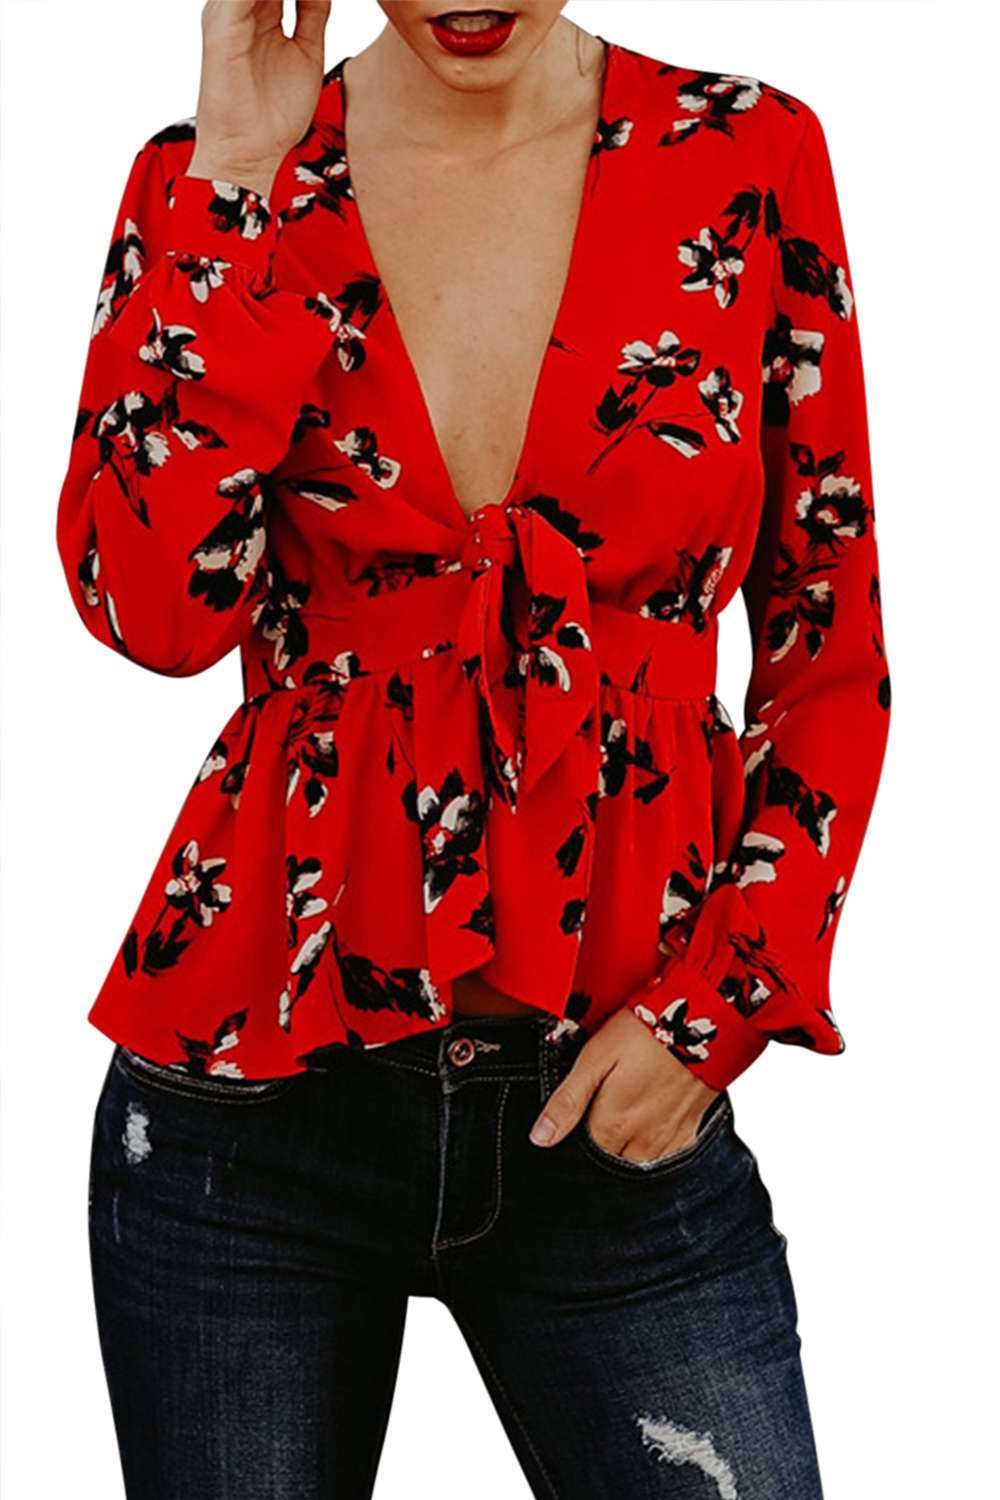 Iyasson Floral Printing V-neck Front Tie Wrapped Ruffled Hem Top